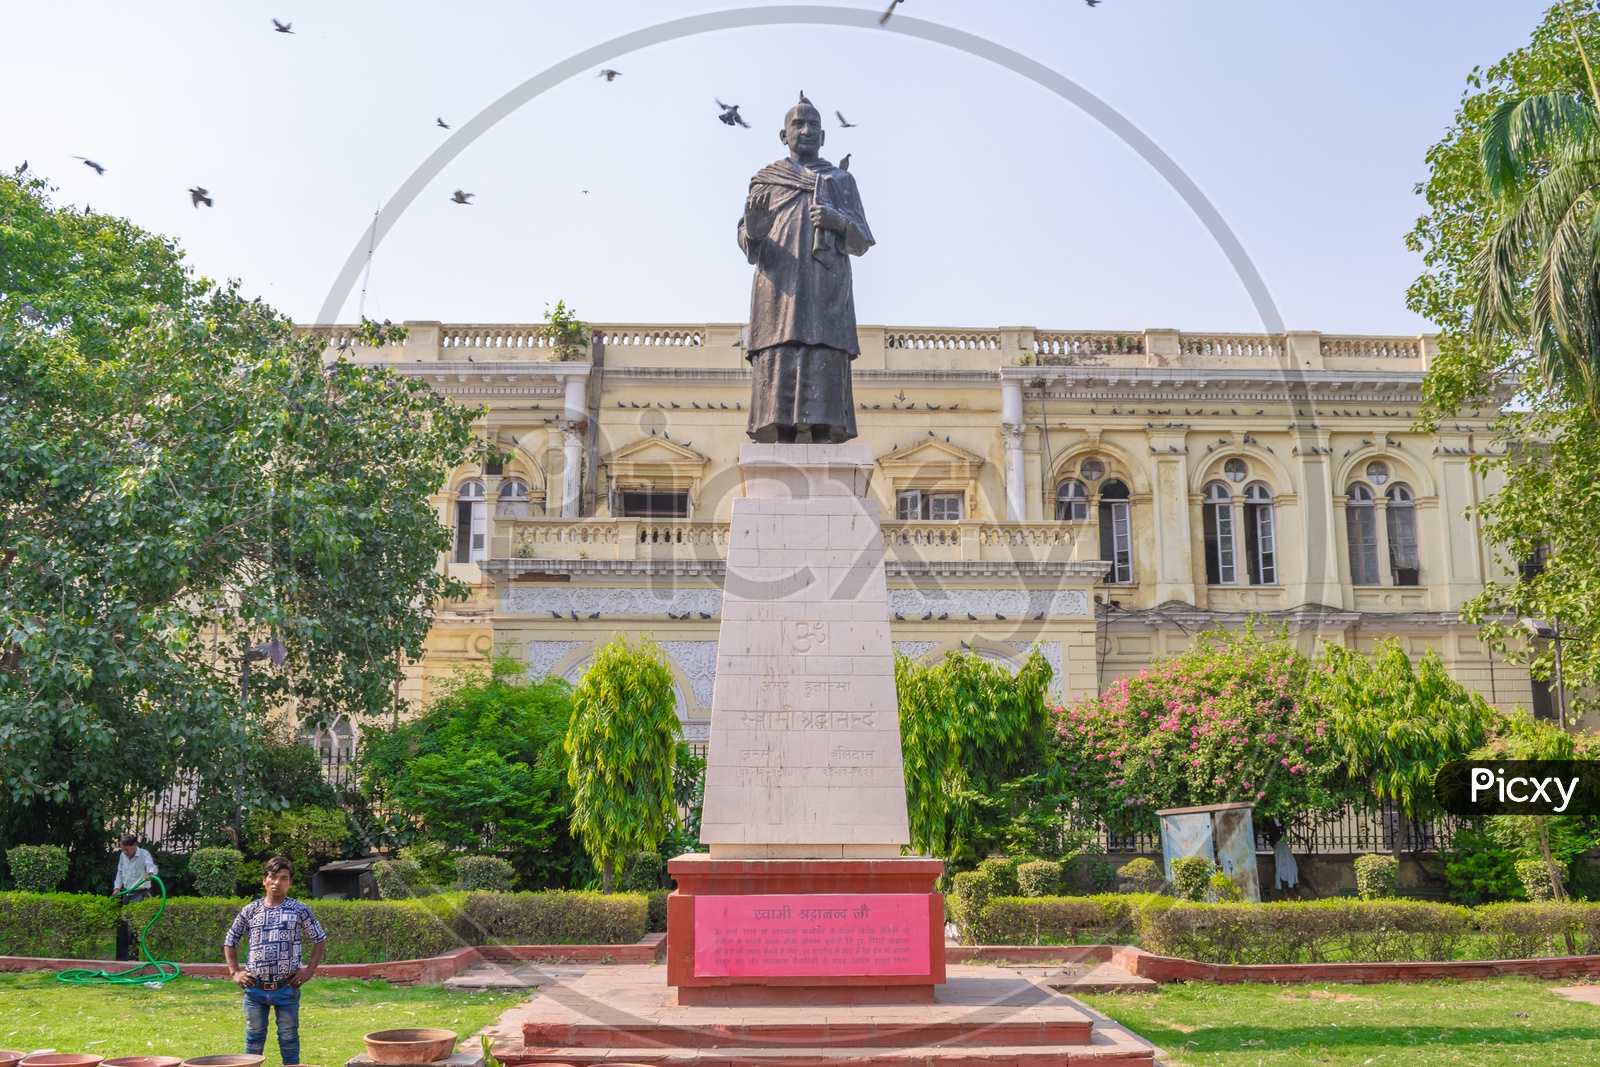 Statue Of Swami Shardhanand in front of Town Hall, Chandni Chowk, Delhi